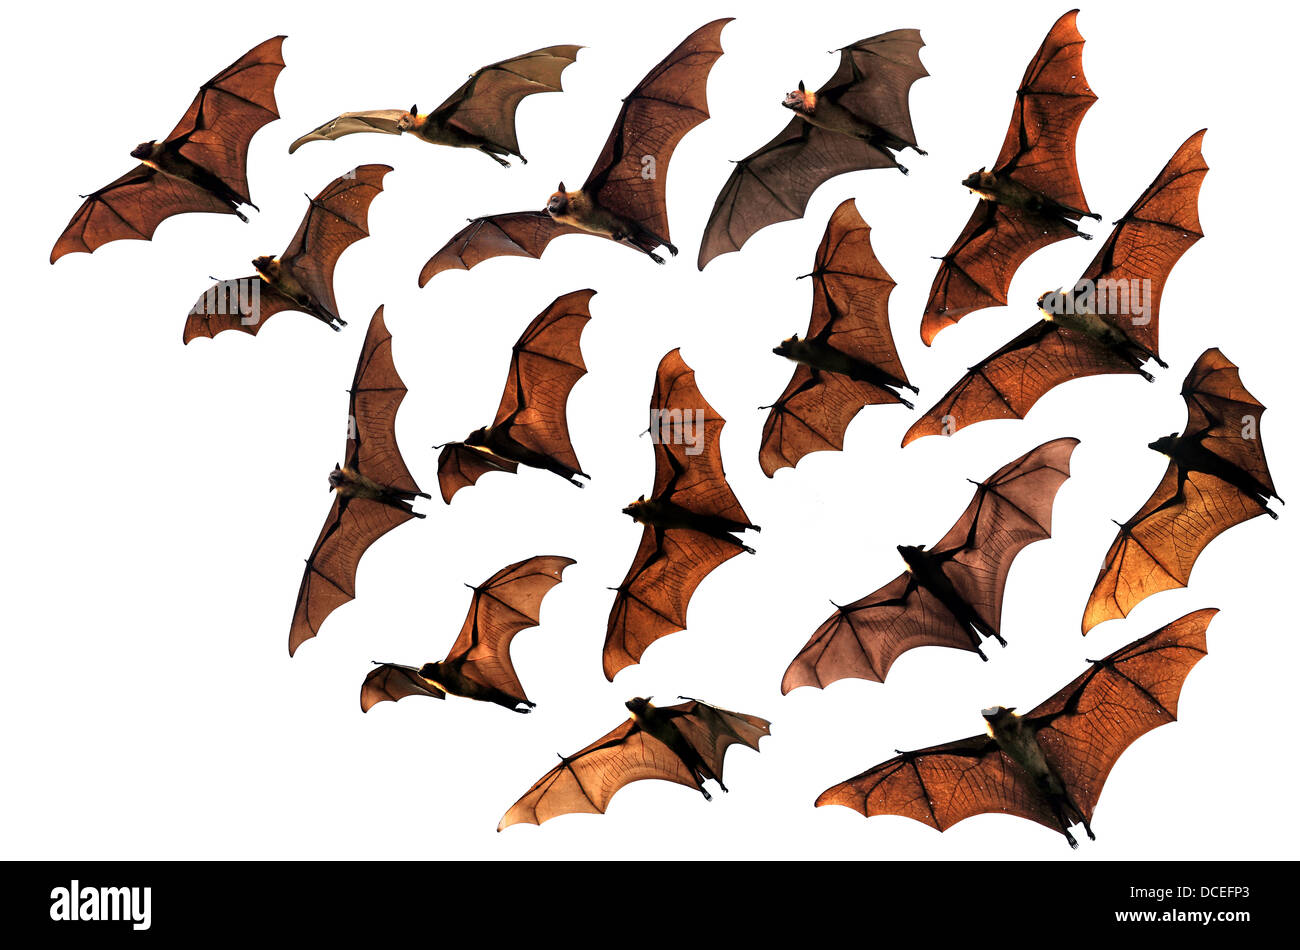 Des chauves souris flying fox colonie flying in sky Banque D'Images